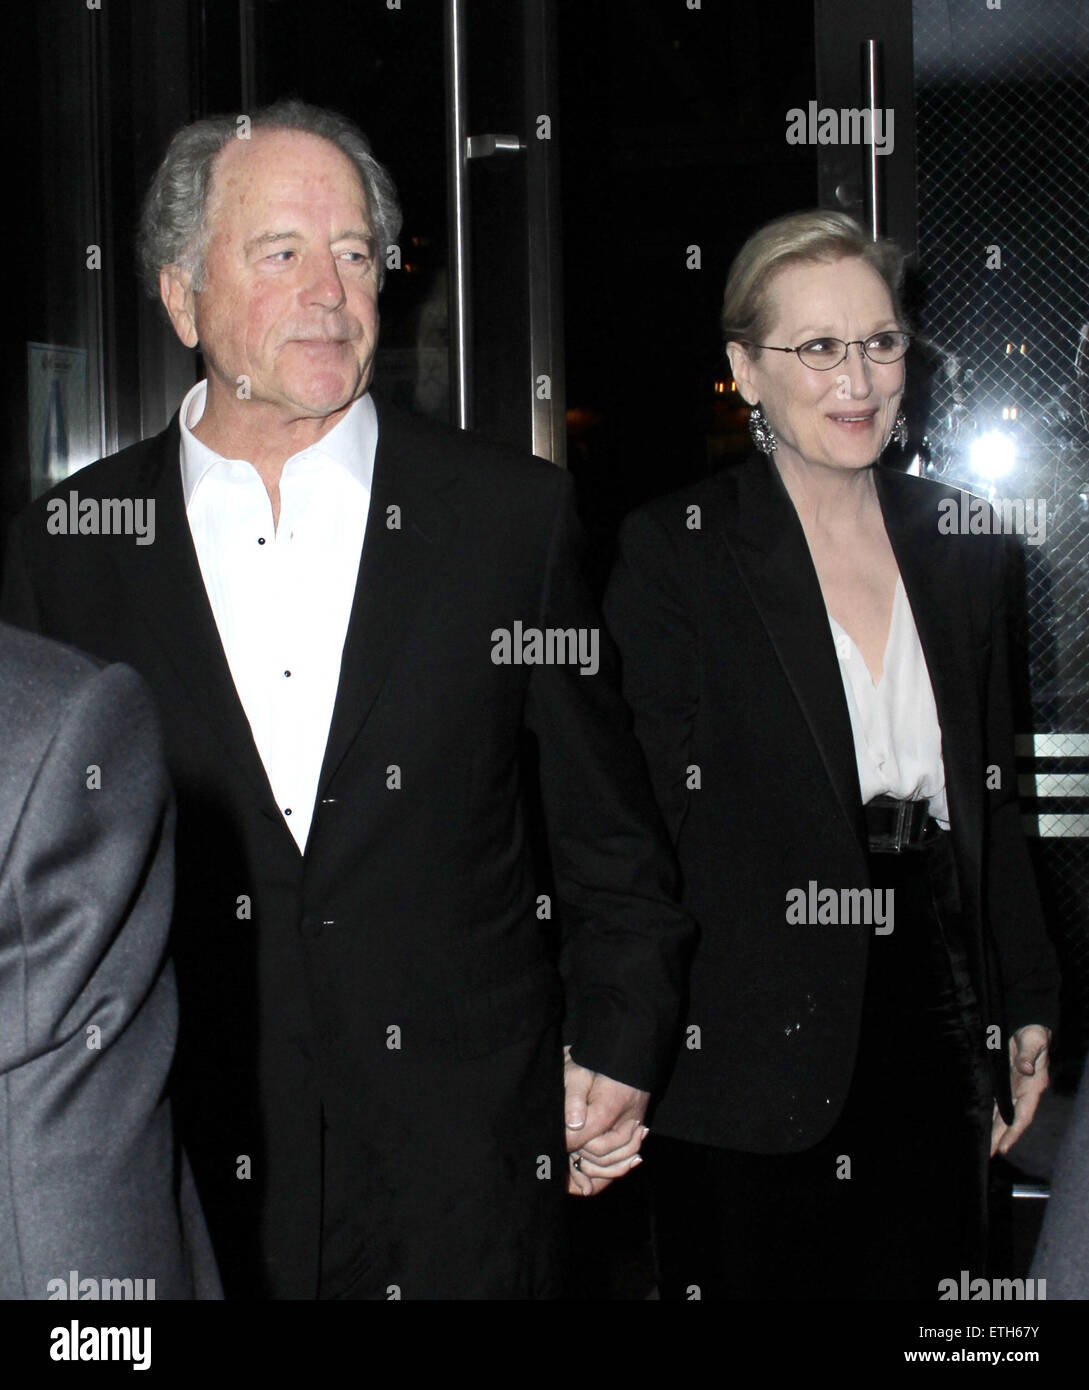 Meryl Streep and husband Don Gummer attend an Oscars after party held at The Palm restaurant in Beverly Hills  Featuring: Meryl Streep, Don Gummer Where: Los Angeles, California, United States When: 23 Feb 2015 Credit: MONEY$HOT/WENN.com Stock Photo